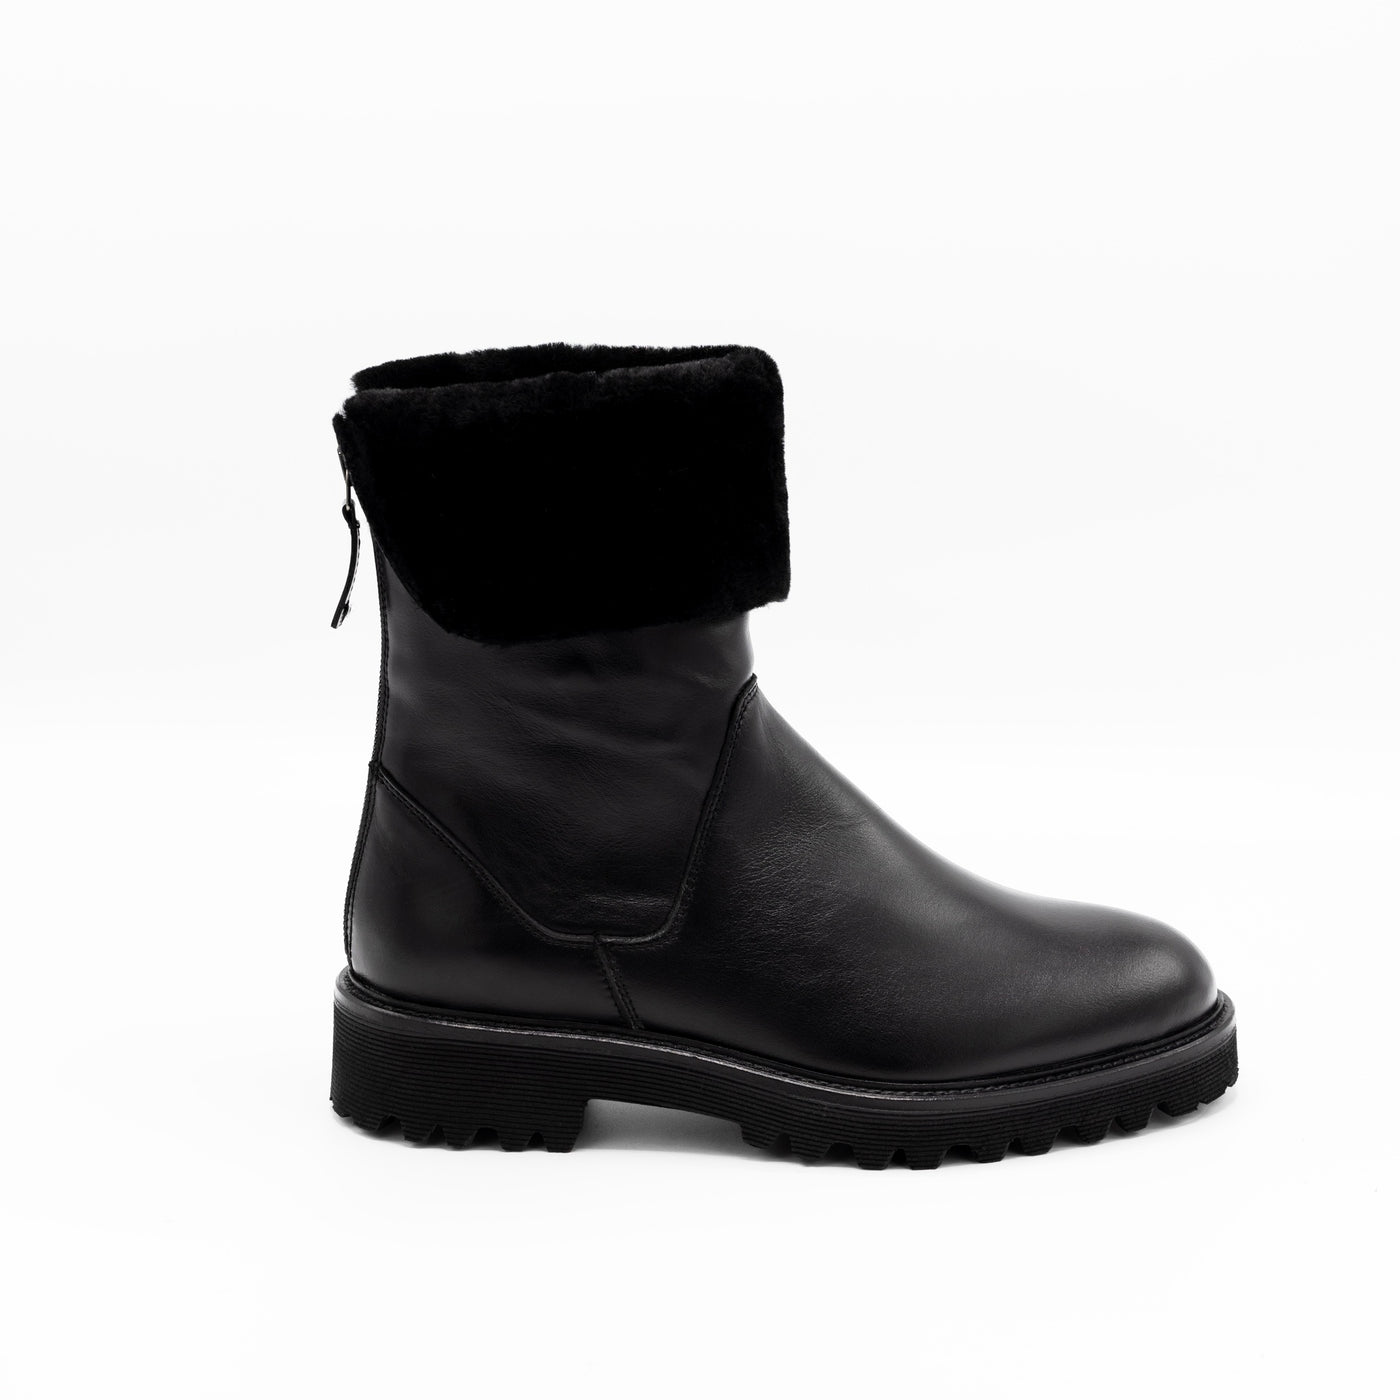 Shearling Lined Black Leather Boots